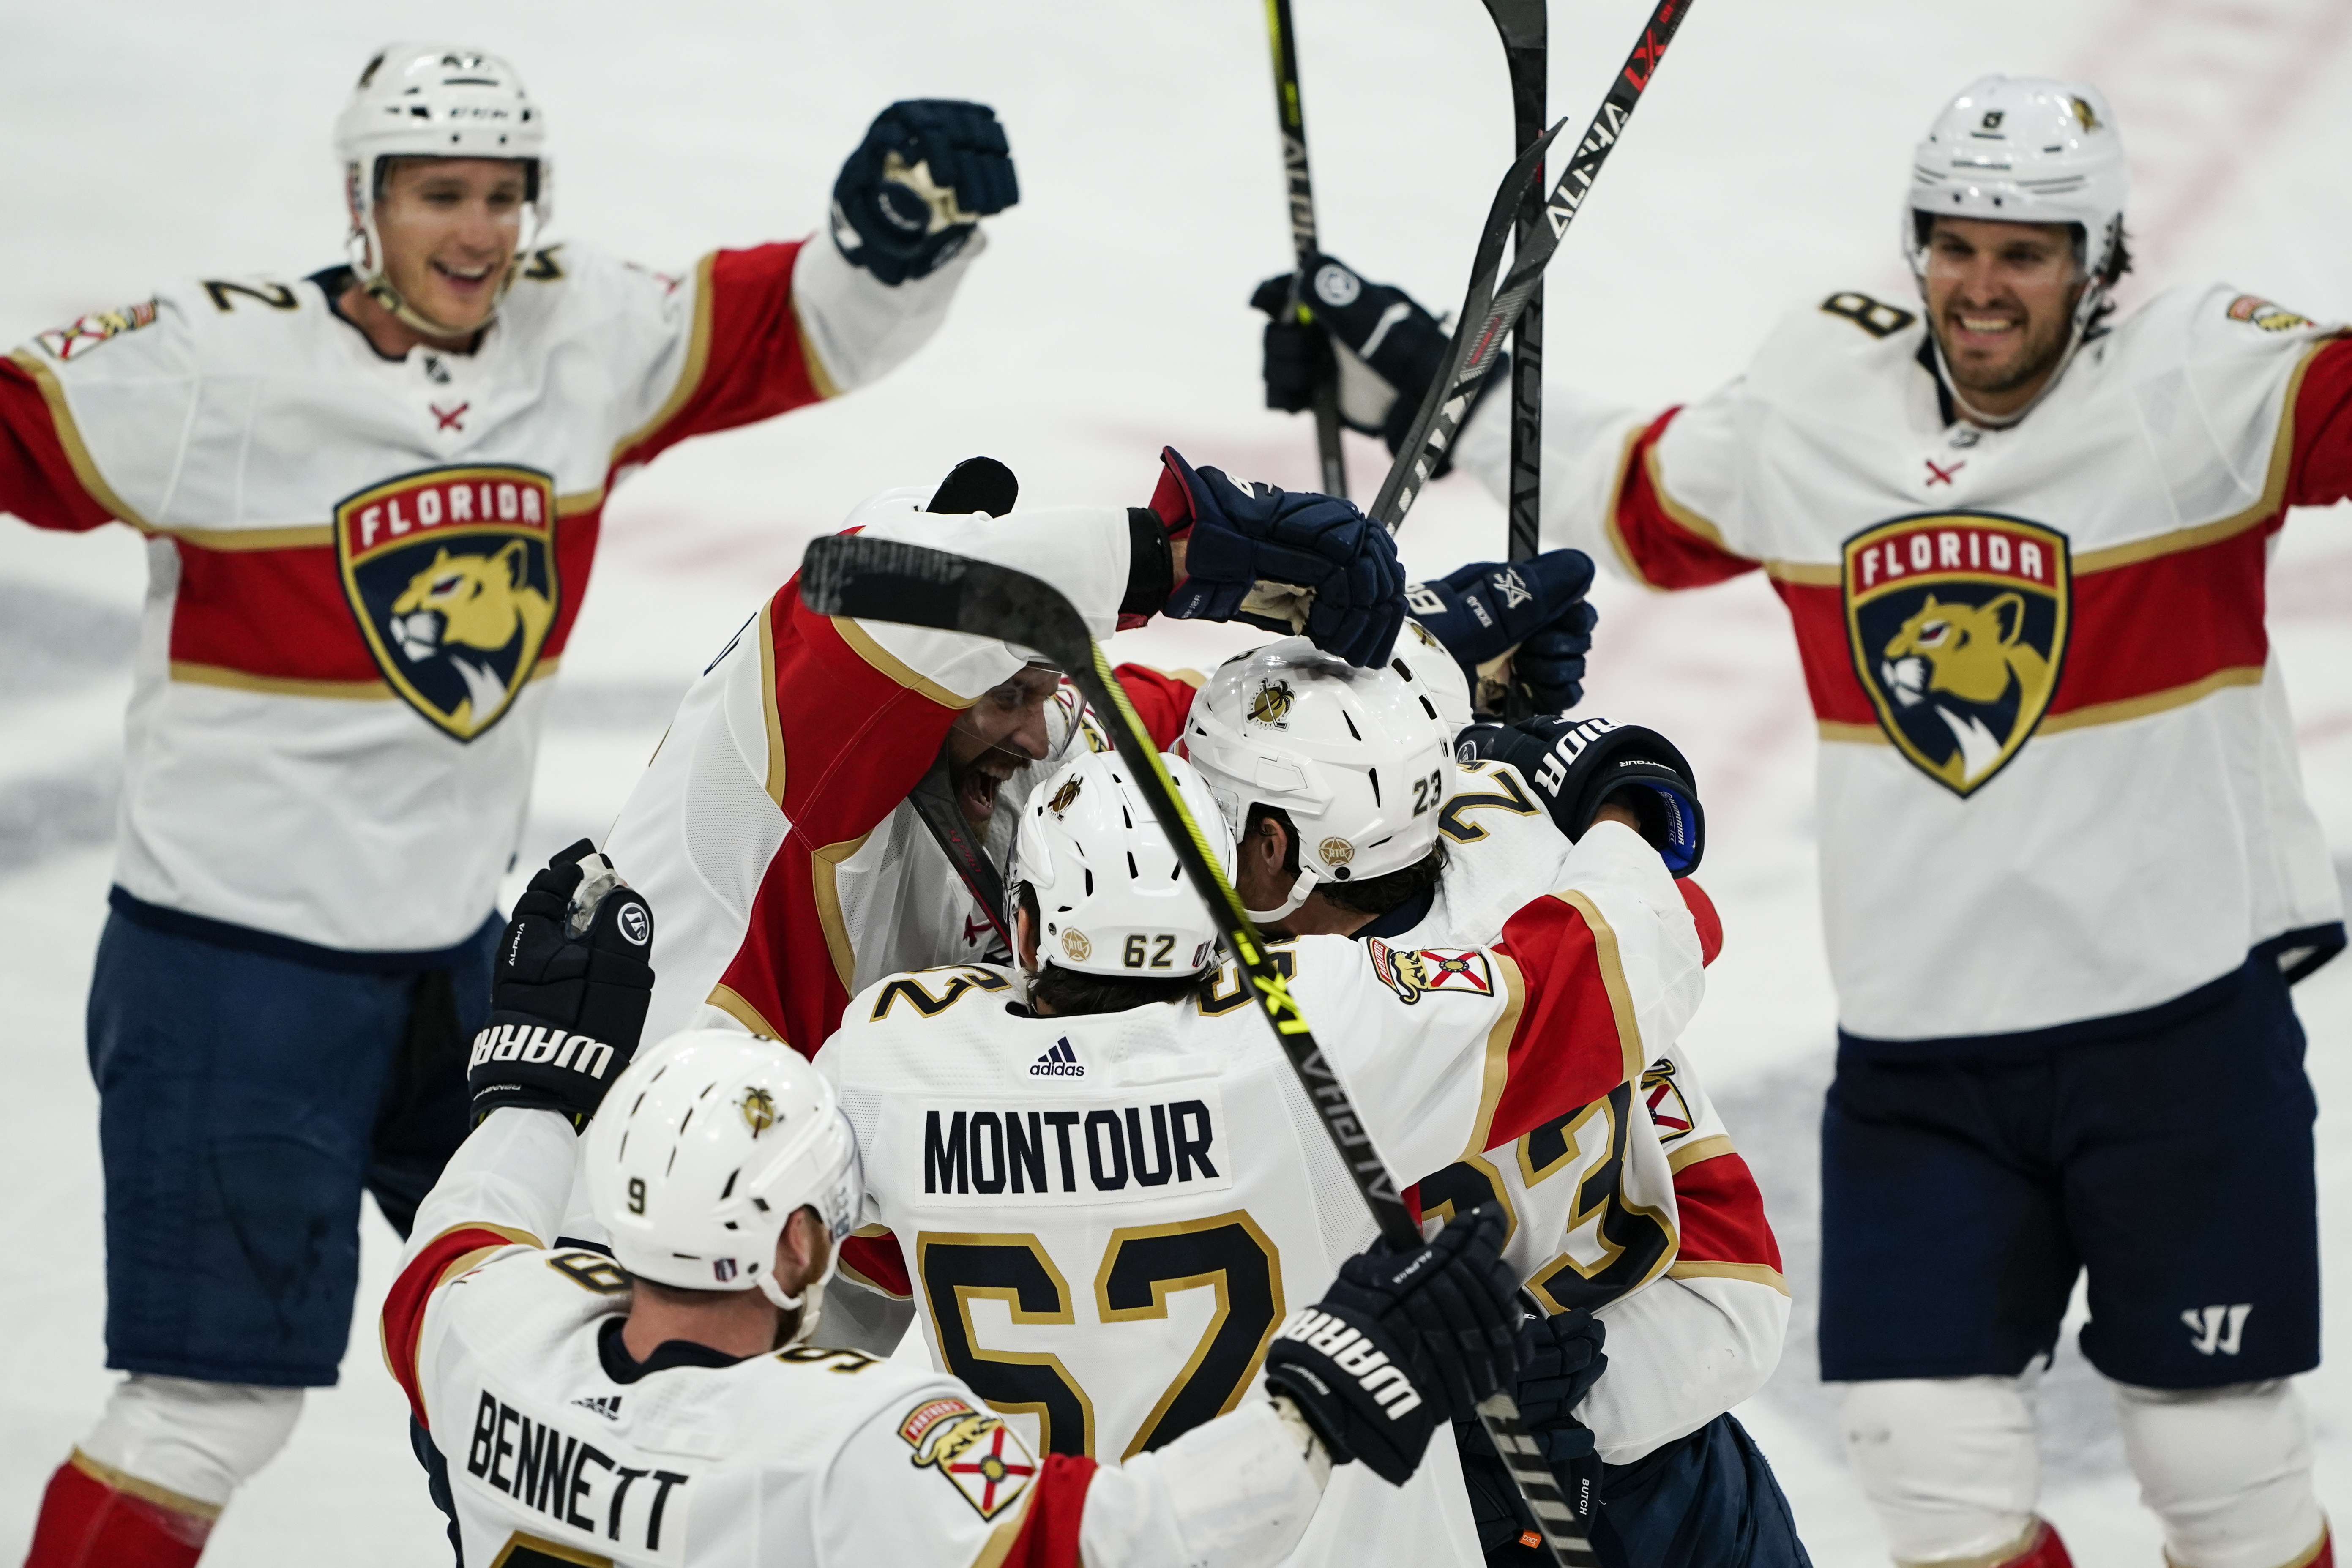 Panthers rout Capitals 5-1 in Game 2 to even series